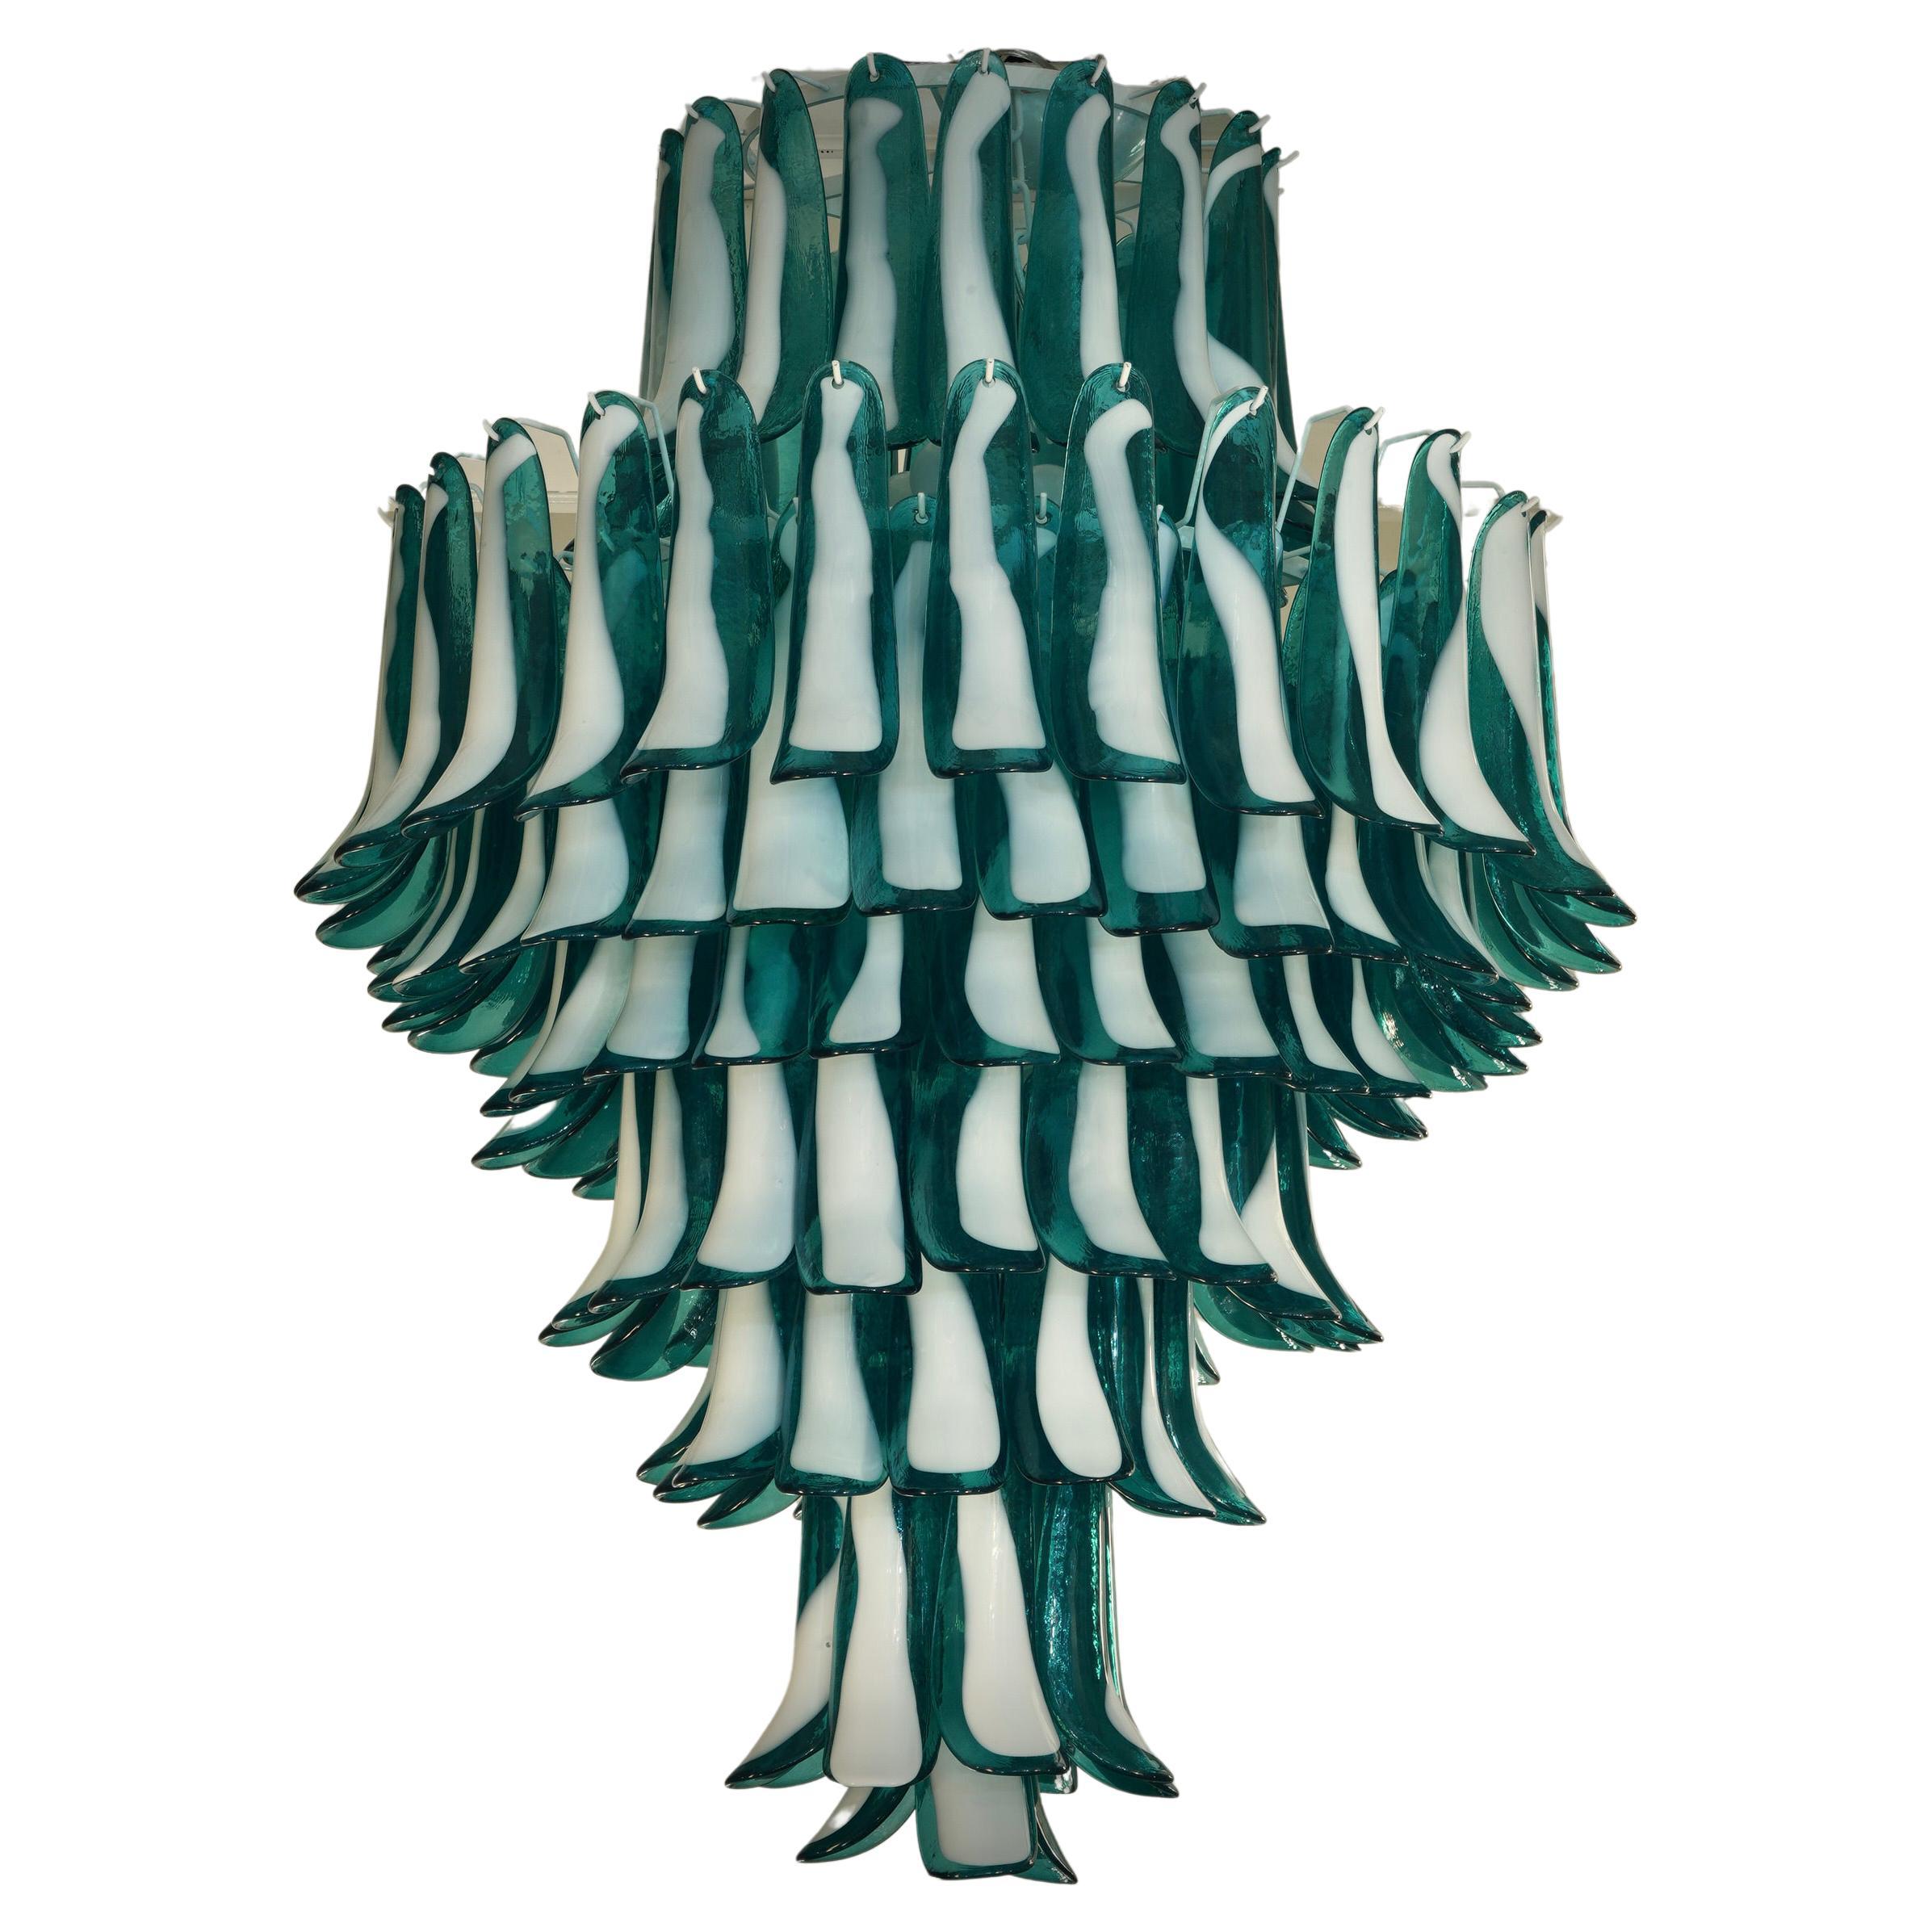 In the style of Gruppo Luce for La Murrina Emerald Color Chandelier, 2010’s